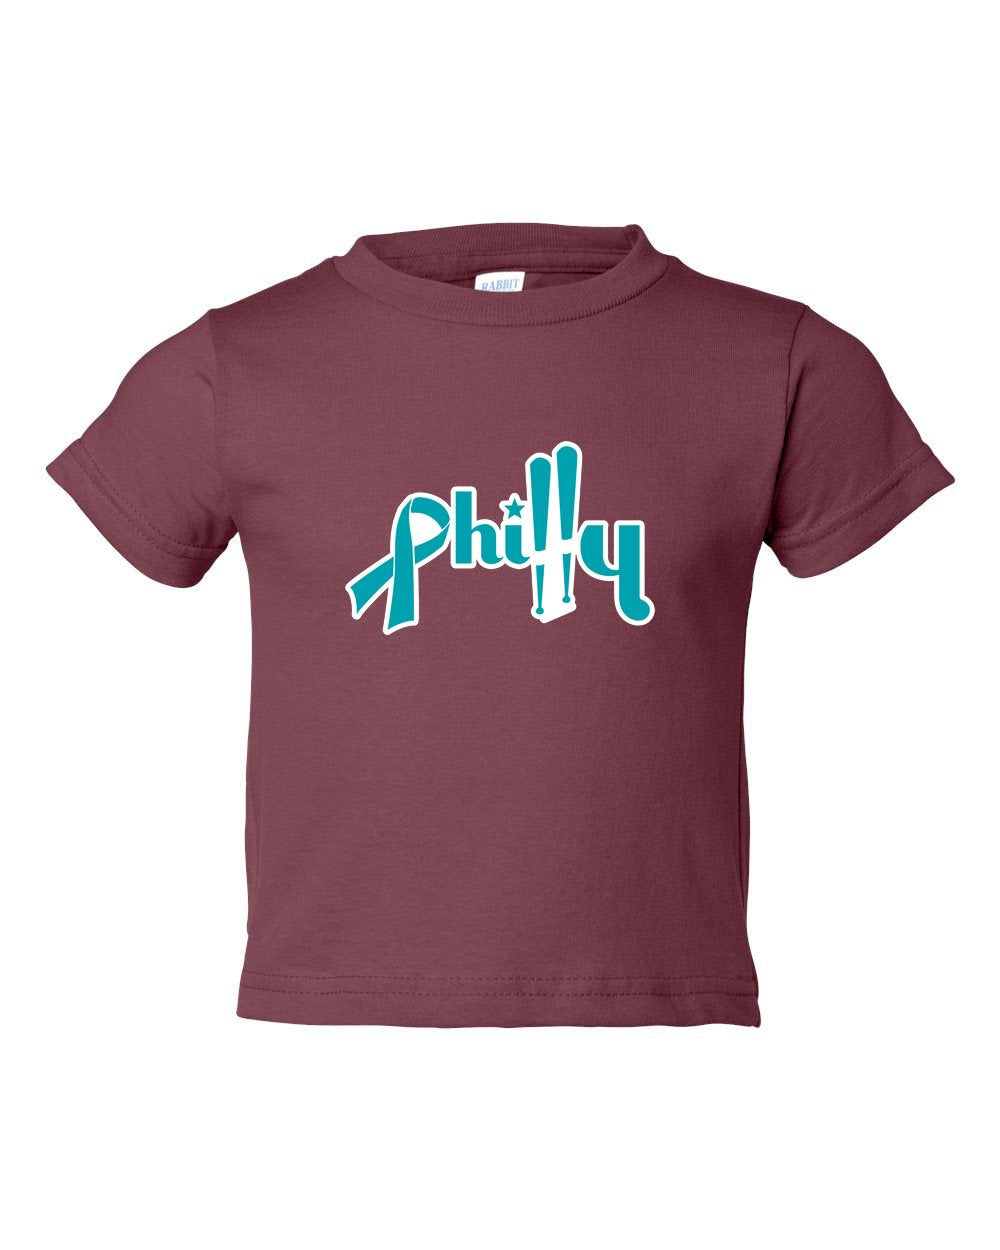 Ovarian Philly TODDLER T-Shirt